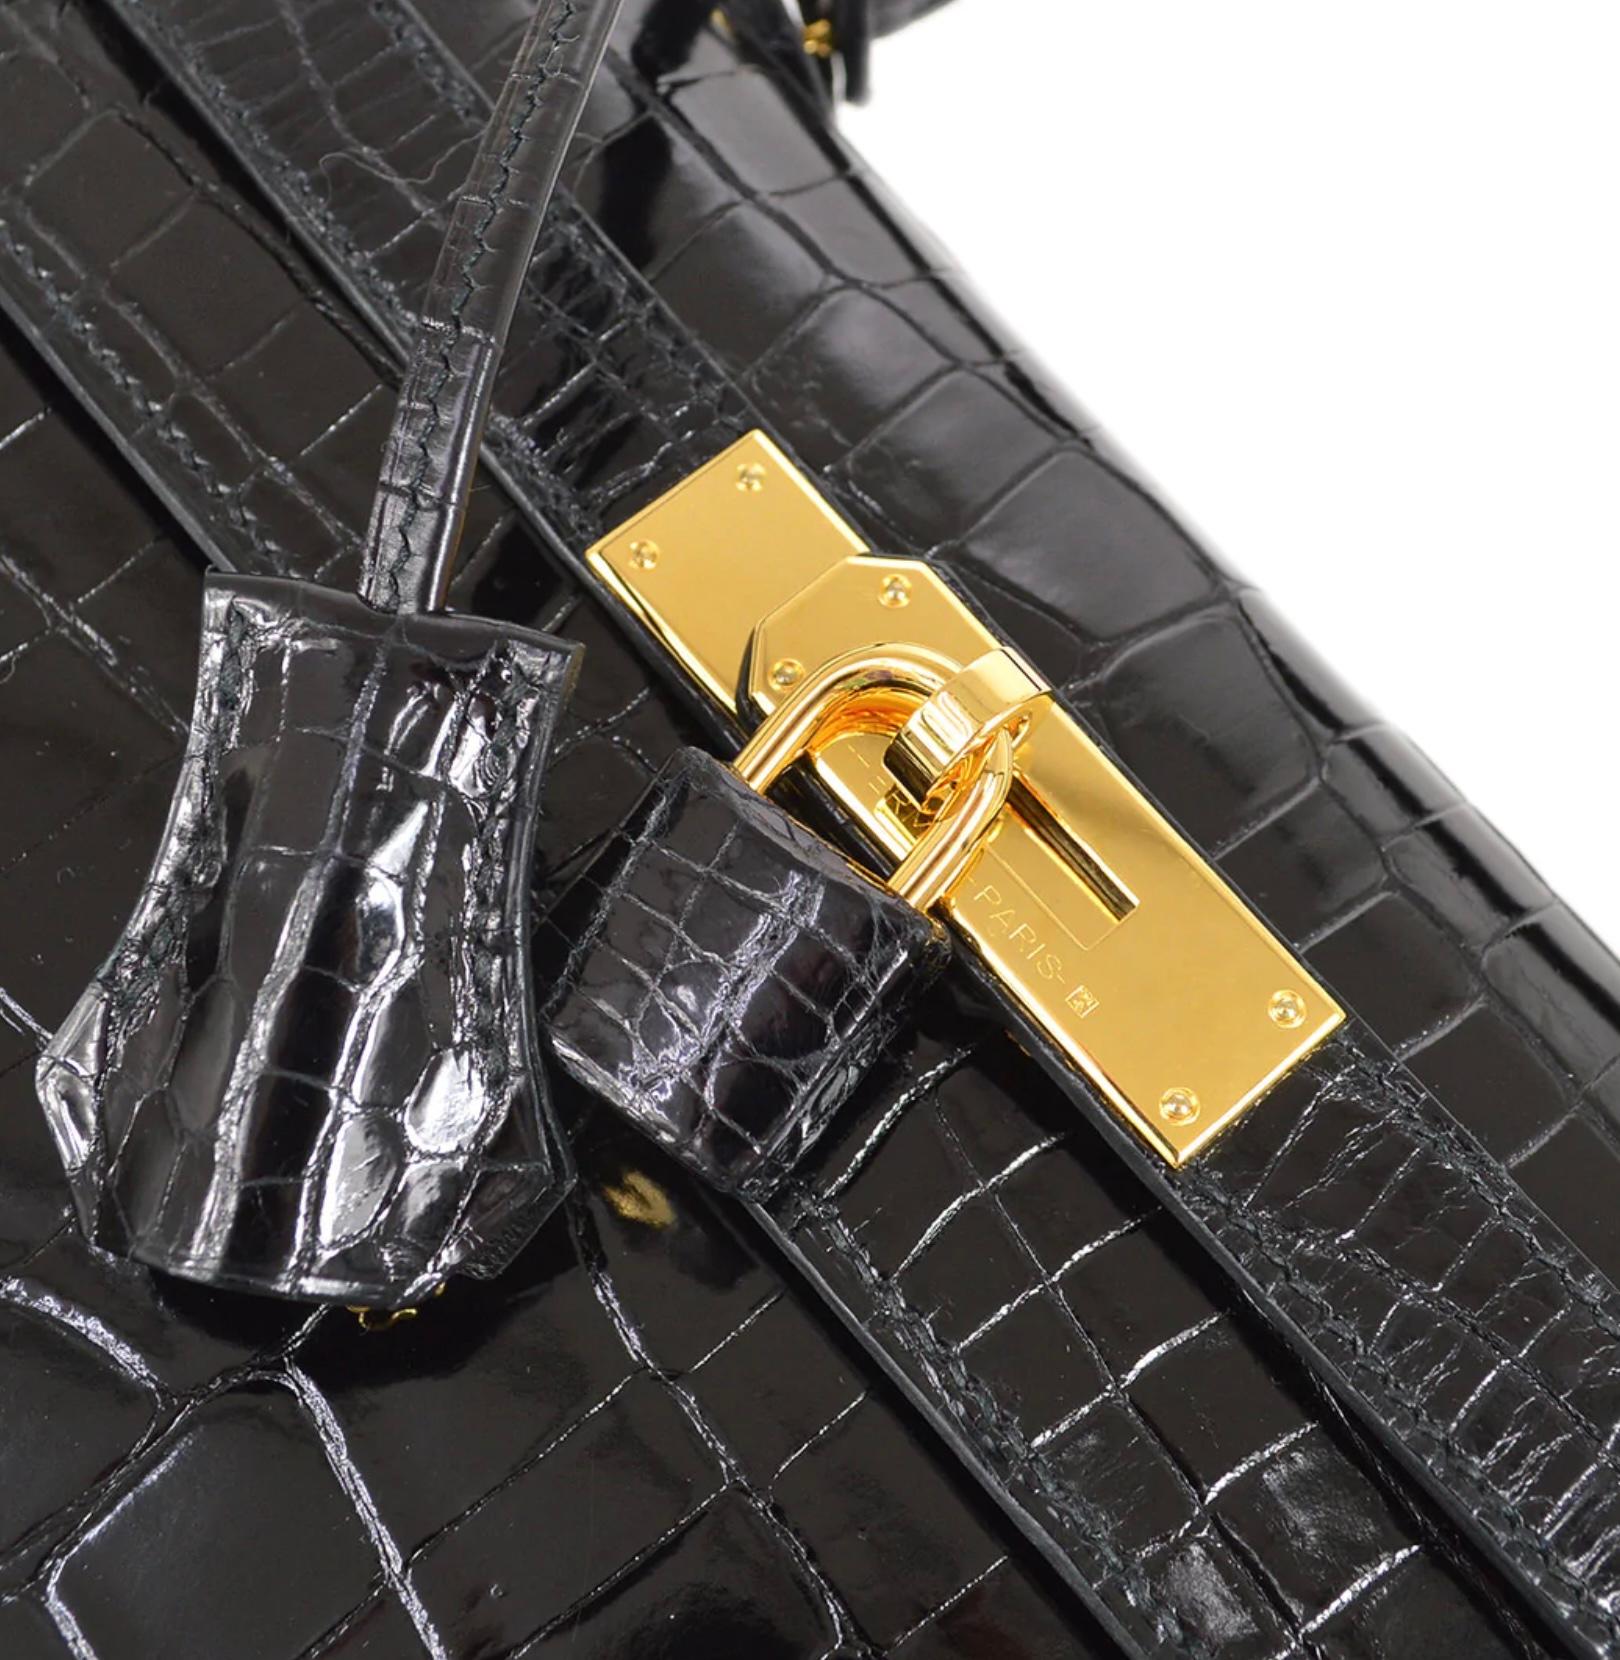 Pre-Owned Vintage Condition
From 2019 Collection
Niloticus Crocodile 
Gold Hardware
Measures 11.5